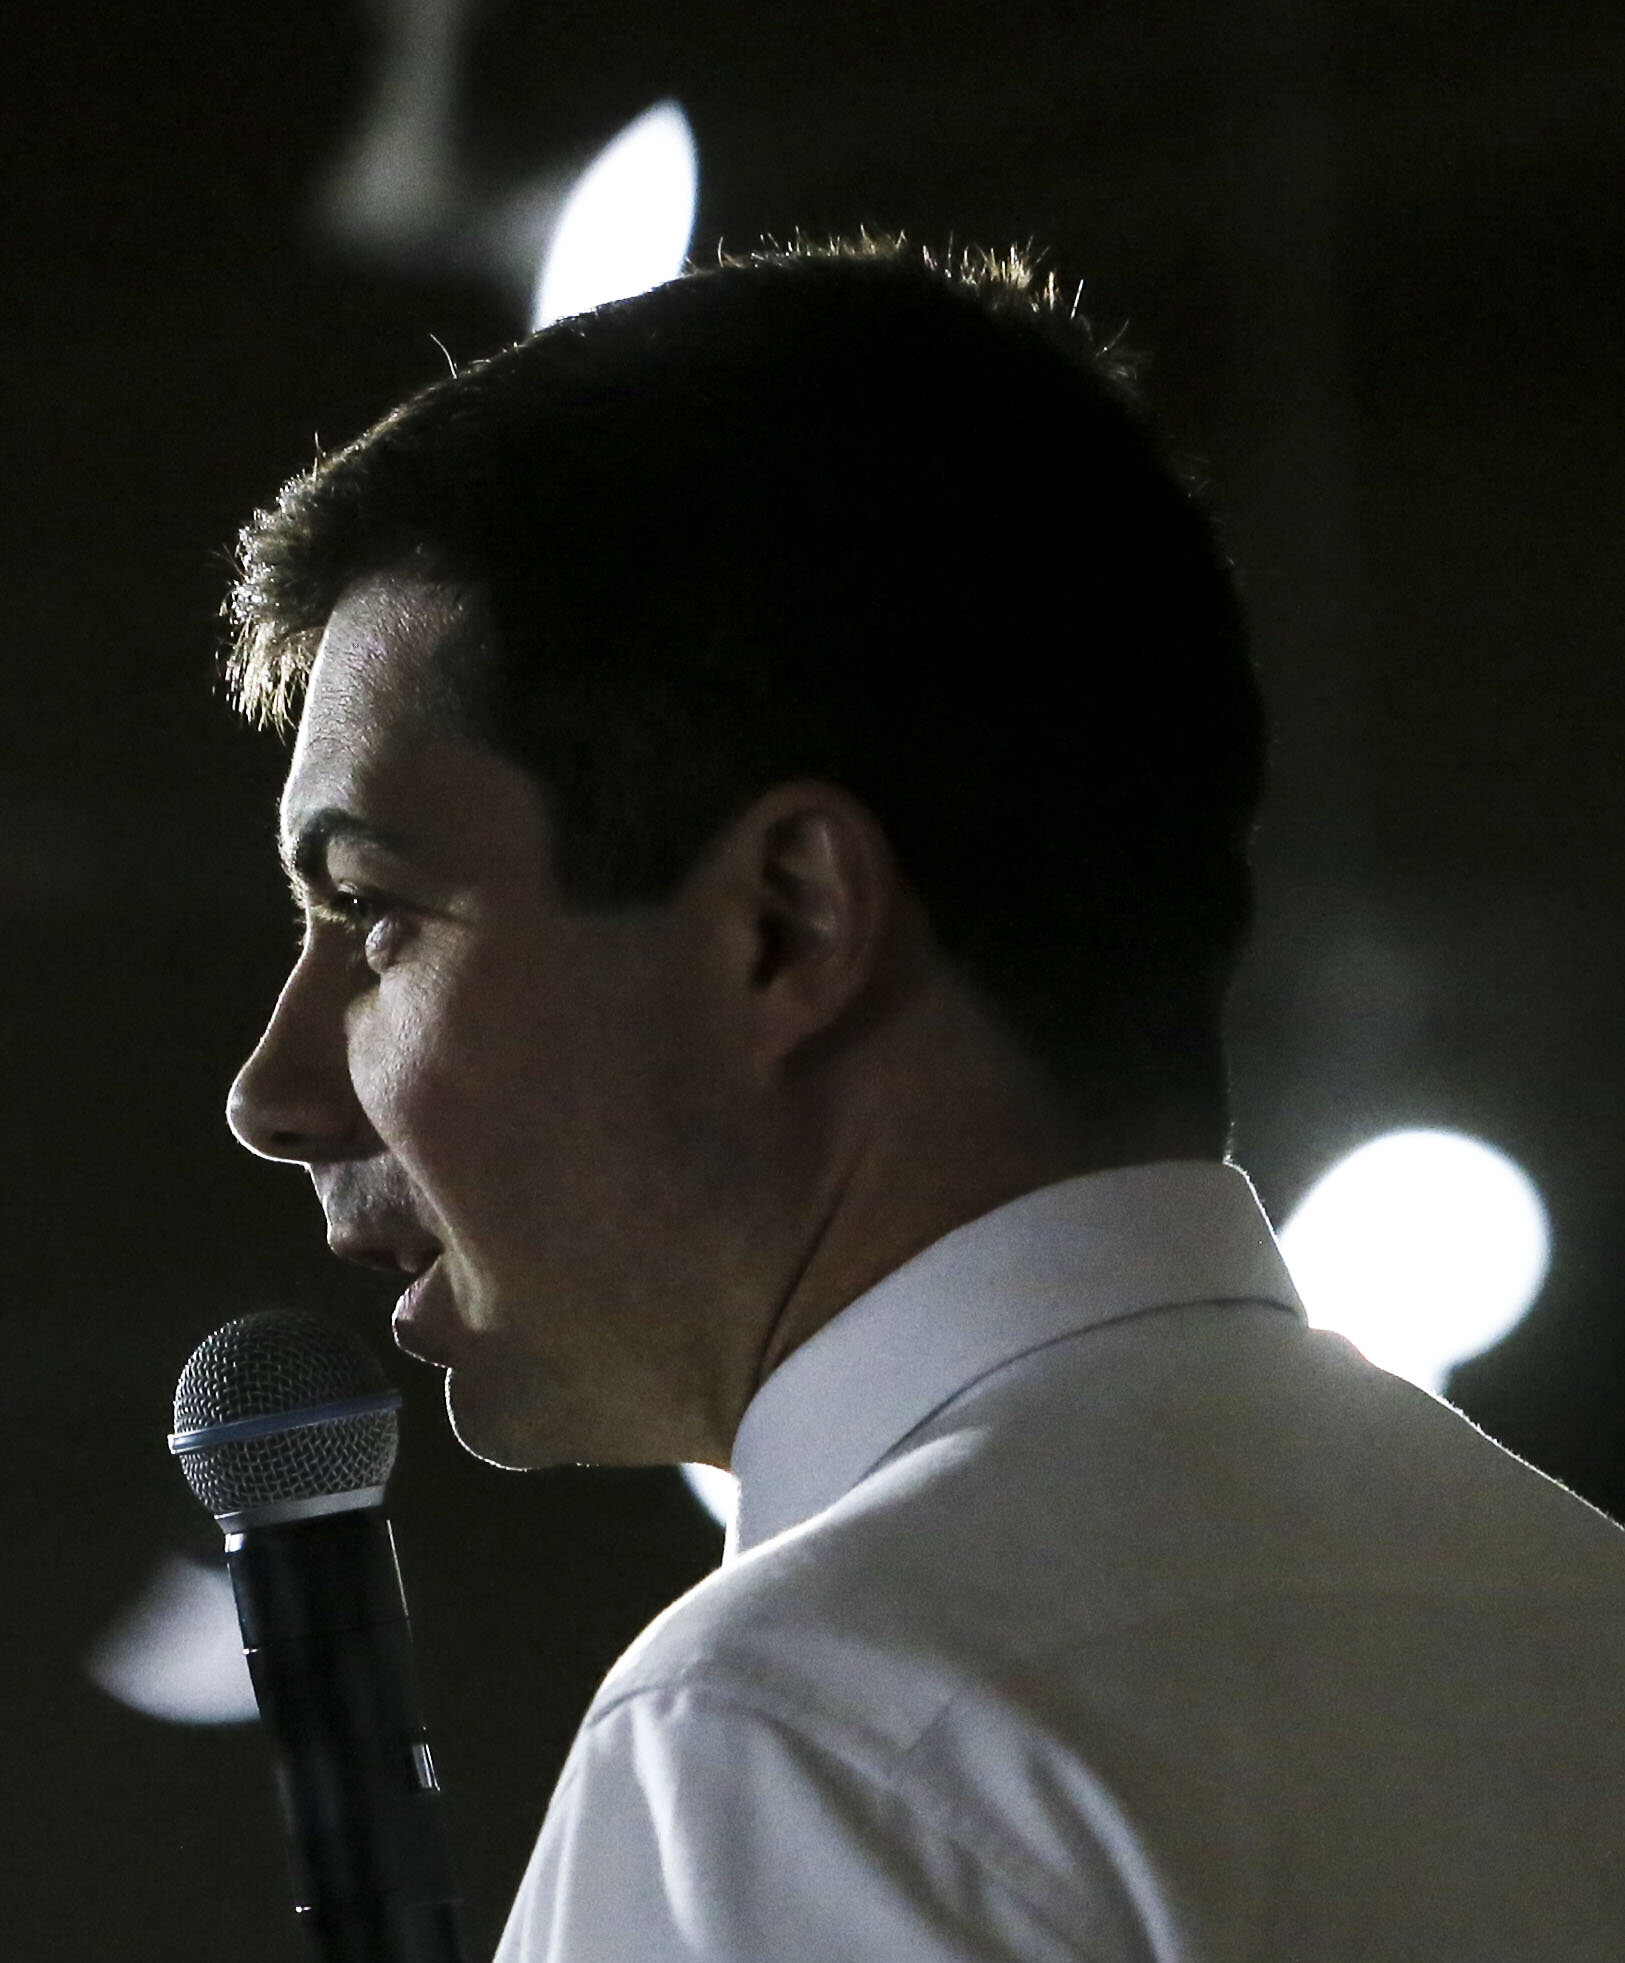  Democratic presidential candidate Pete Buttigieg, and former mayor of South Bend, Indiana speaks to supporters in Muscatine at River's Edge Event Loft, Tuesday, Jan. 21, 2020. 